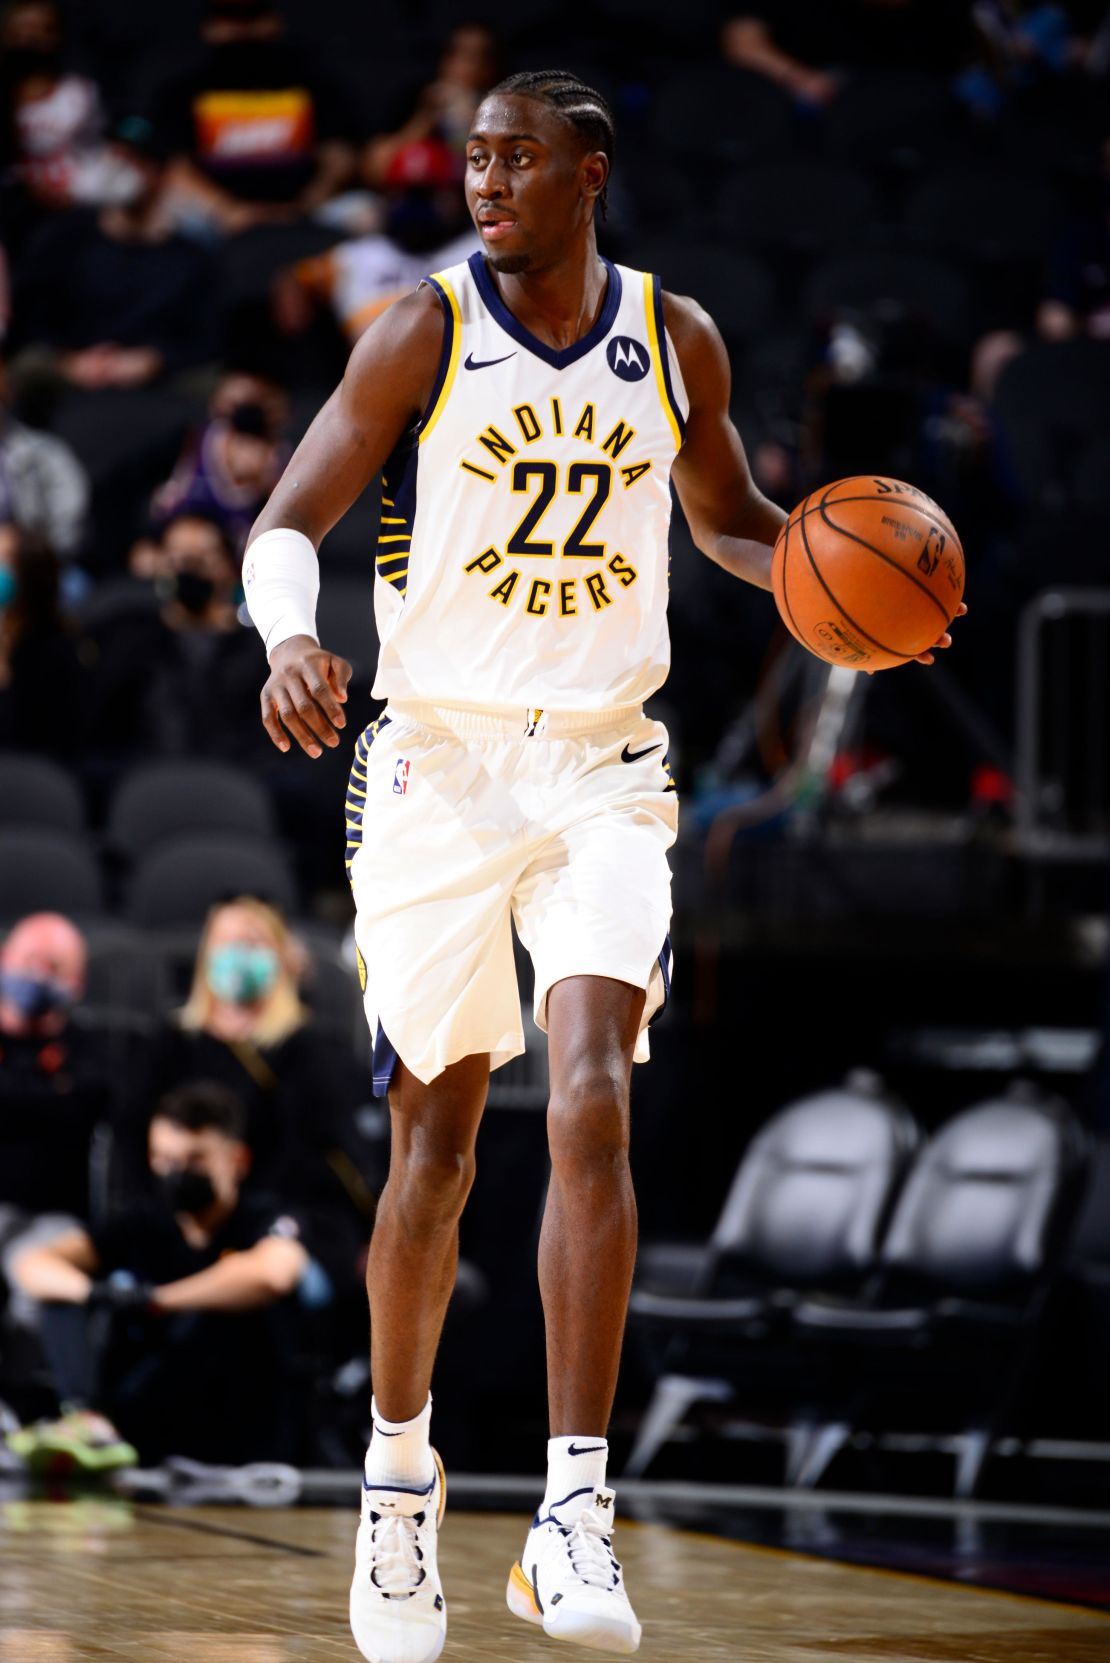 LeVert dribbles the ball during the game against the Phoenix Suns.